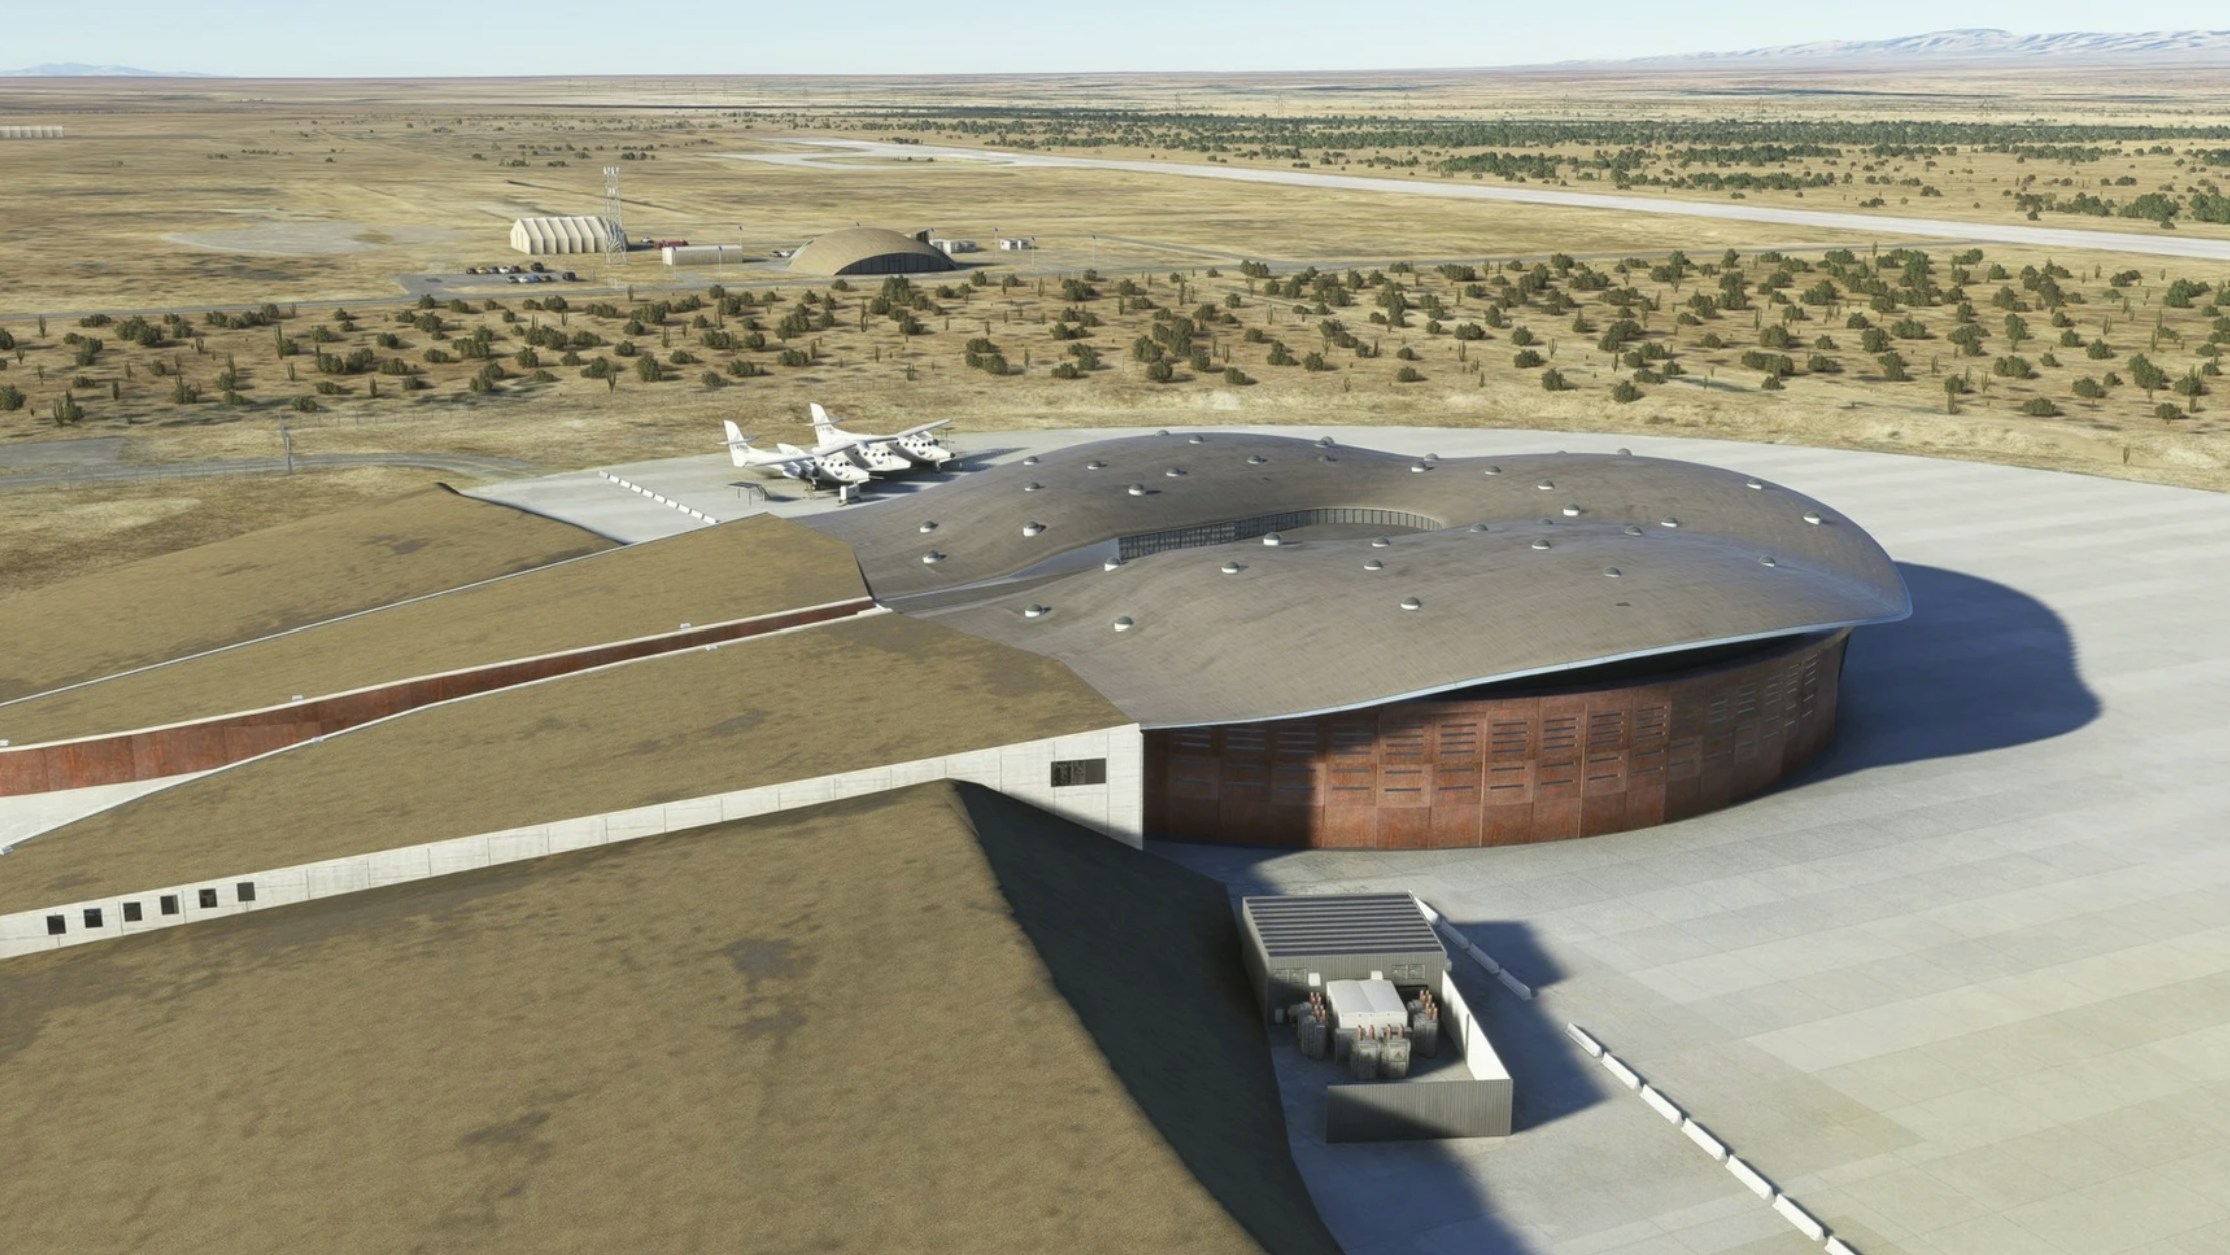 UK2000 publishes Spaceport America for MSFS